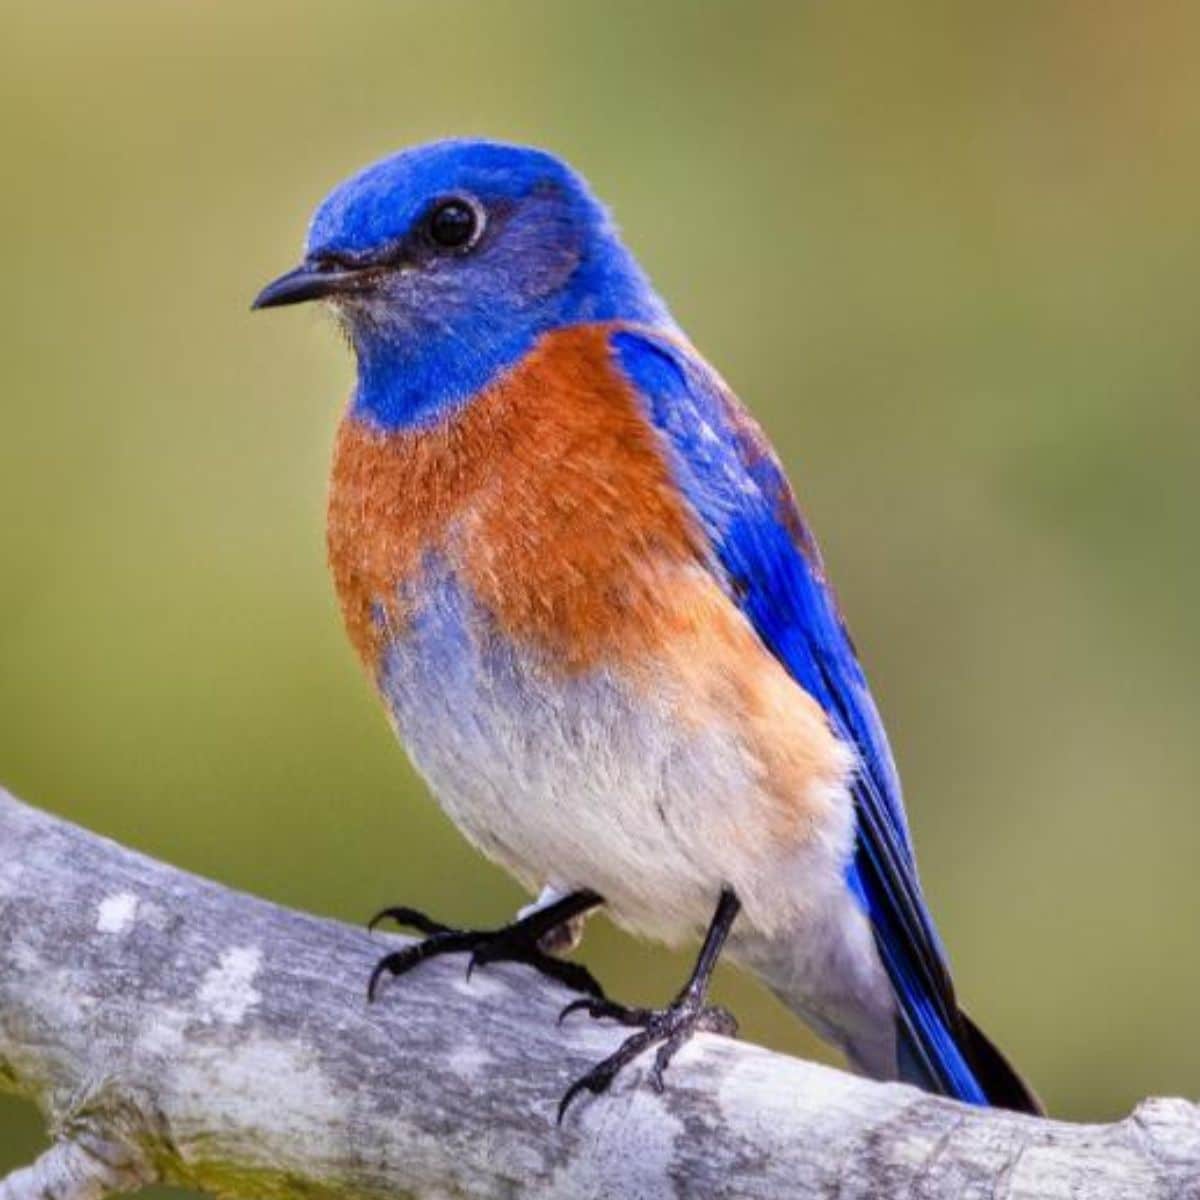 An adorable bluebird perched on a branch.